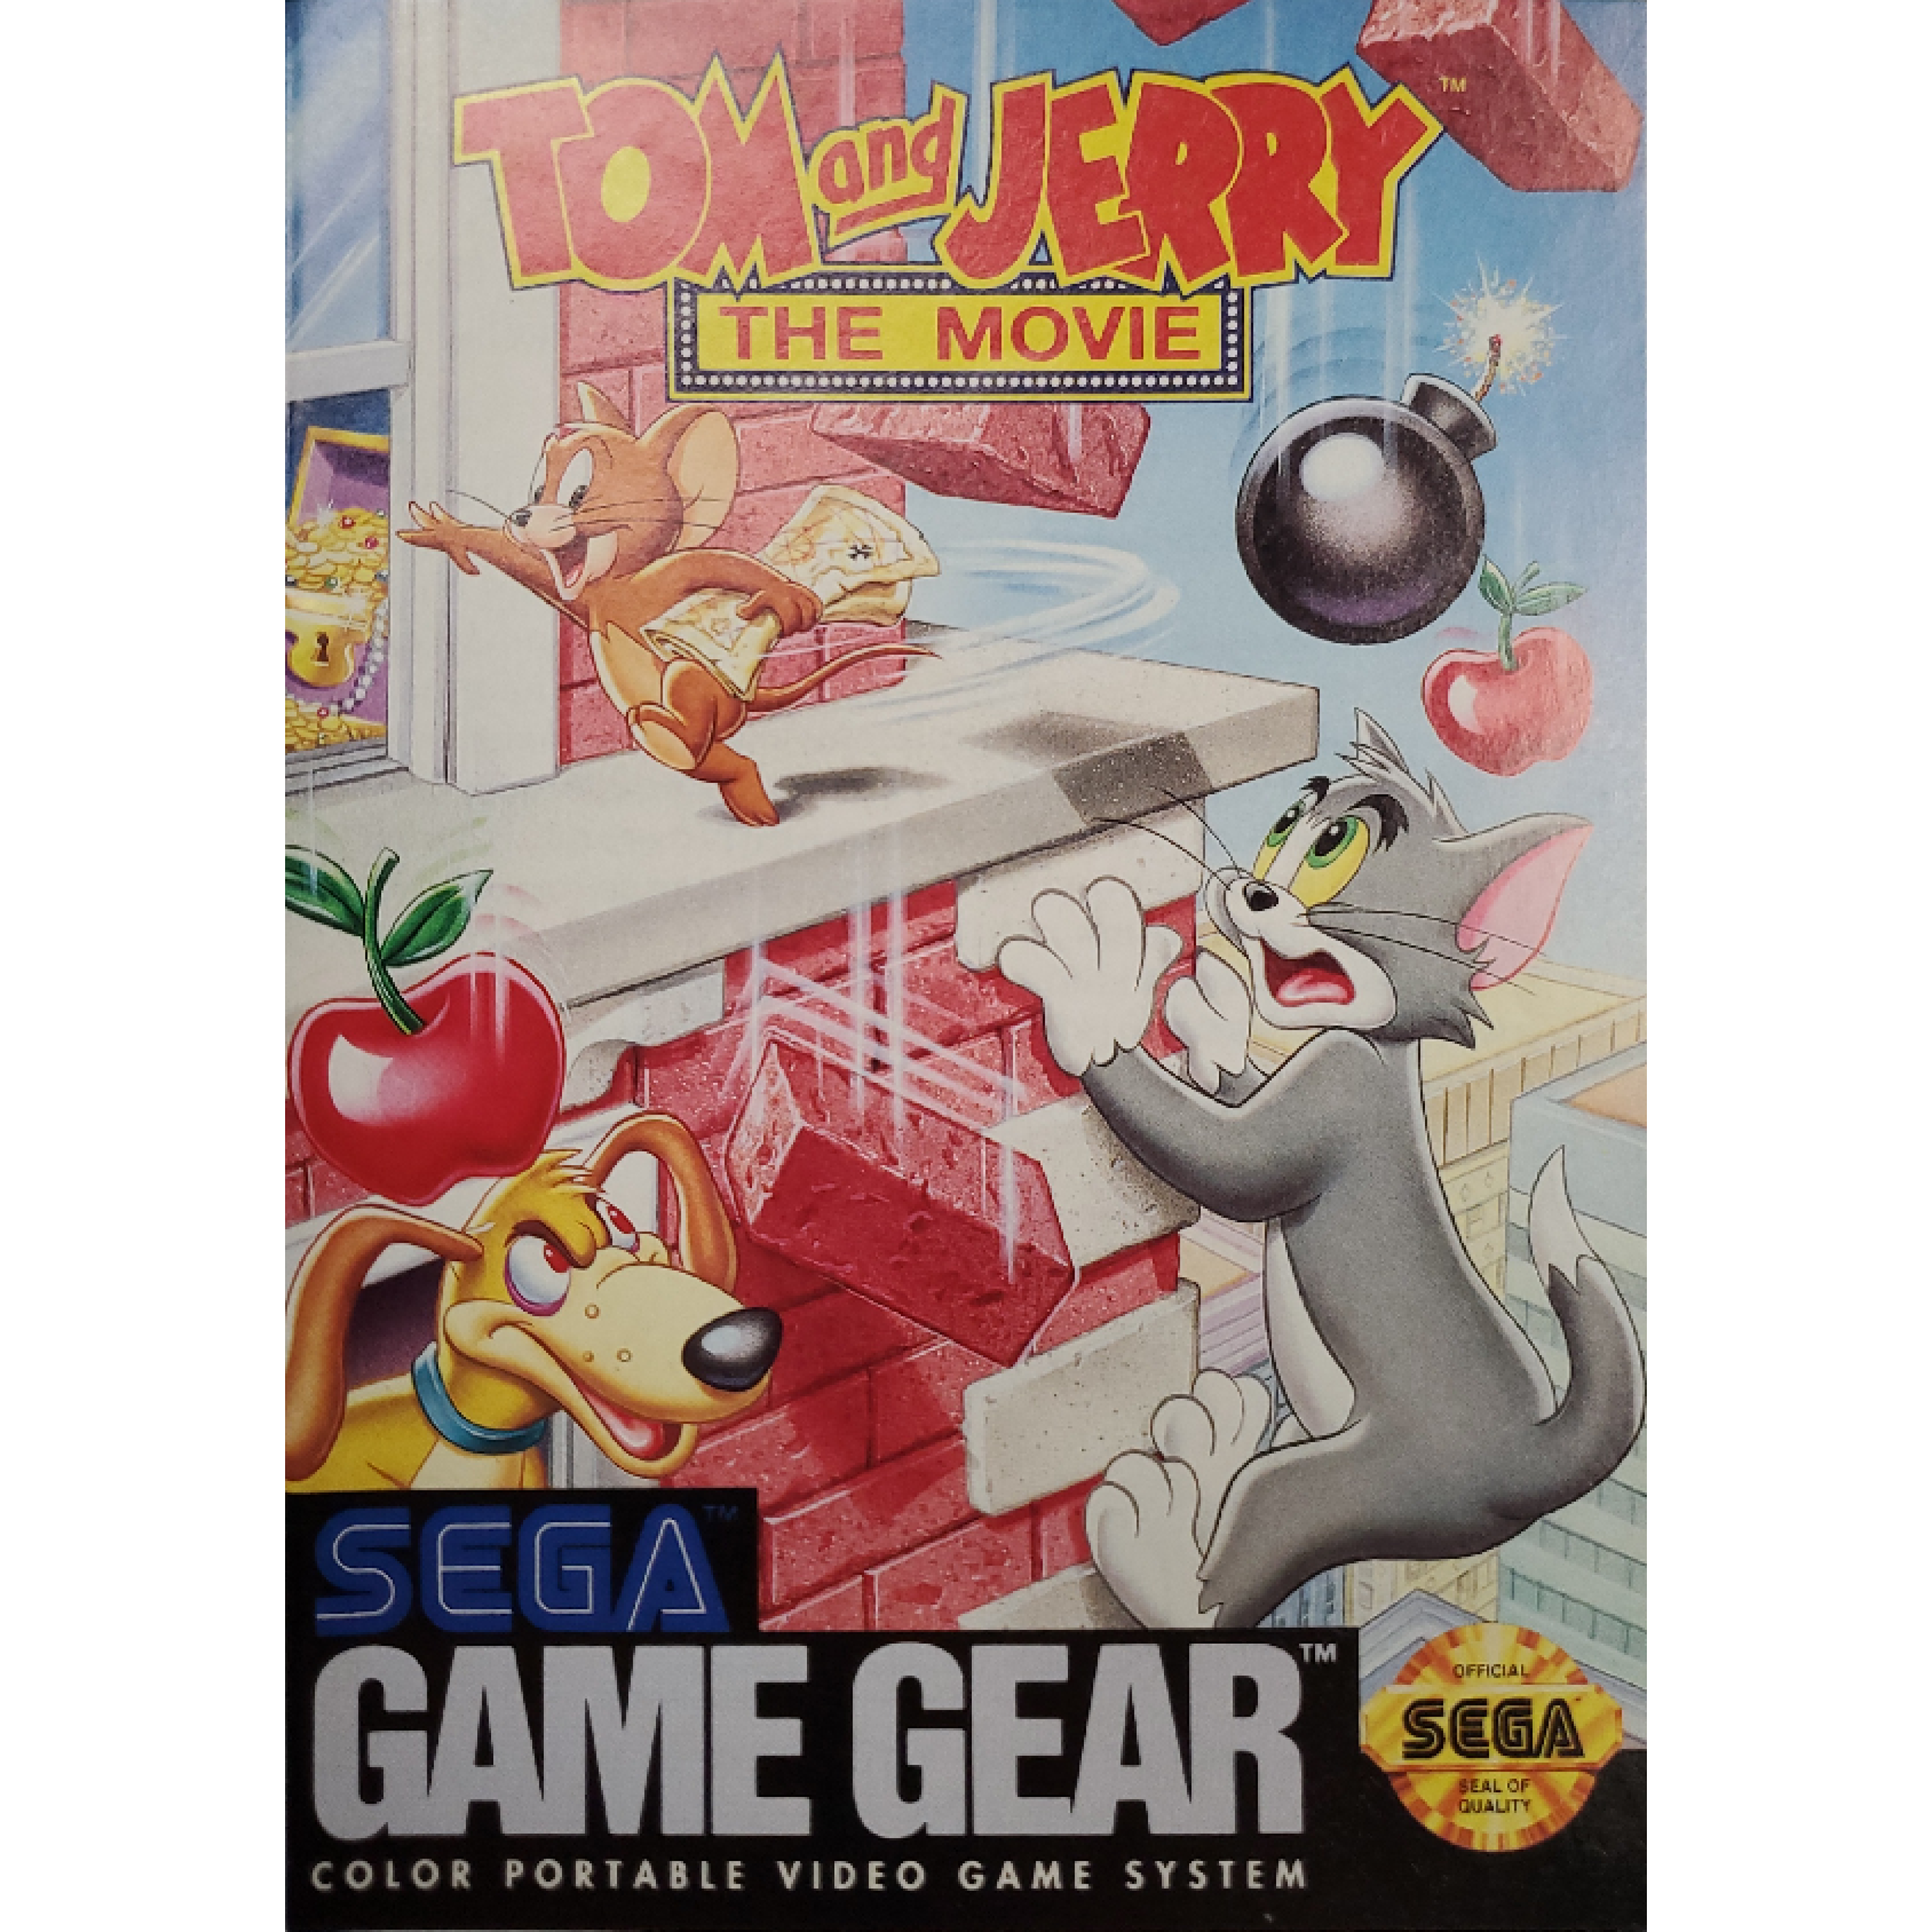 GameGear - Tom and Jerry The Movie (Manual)